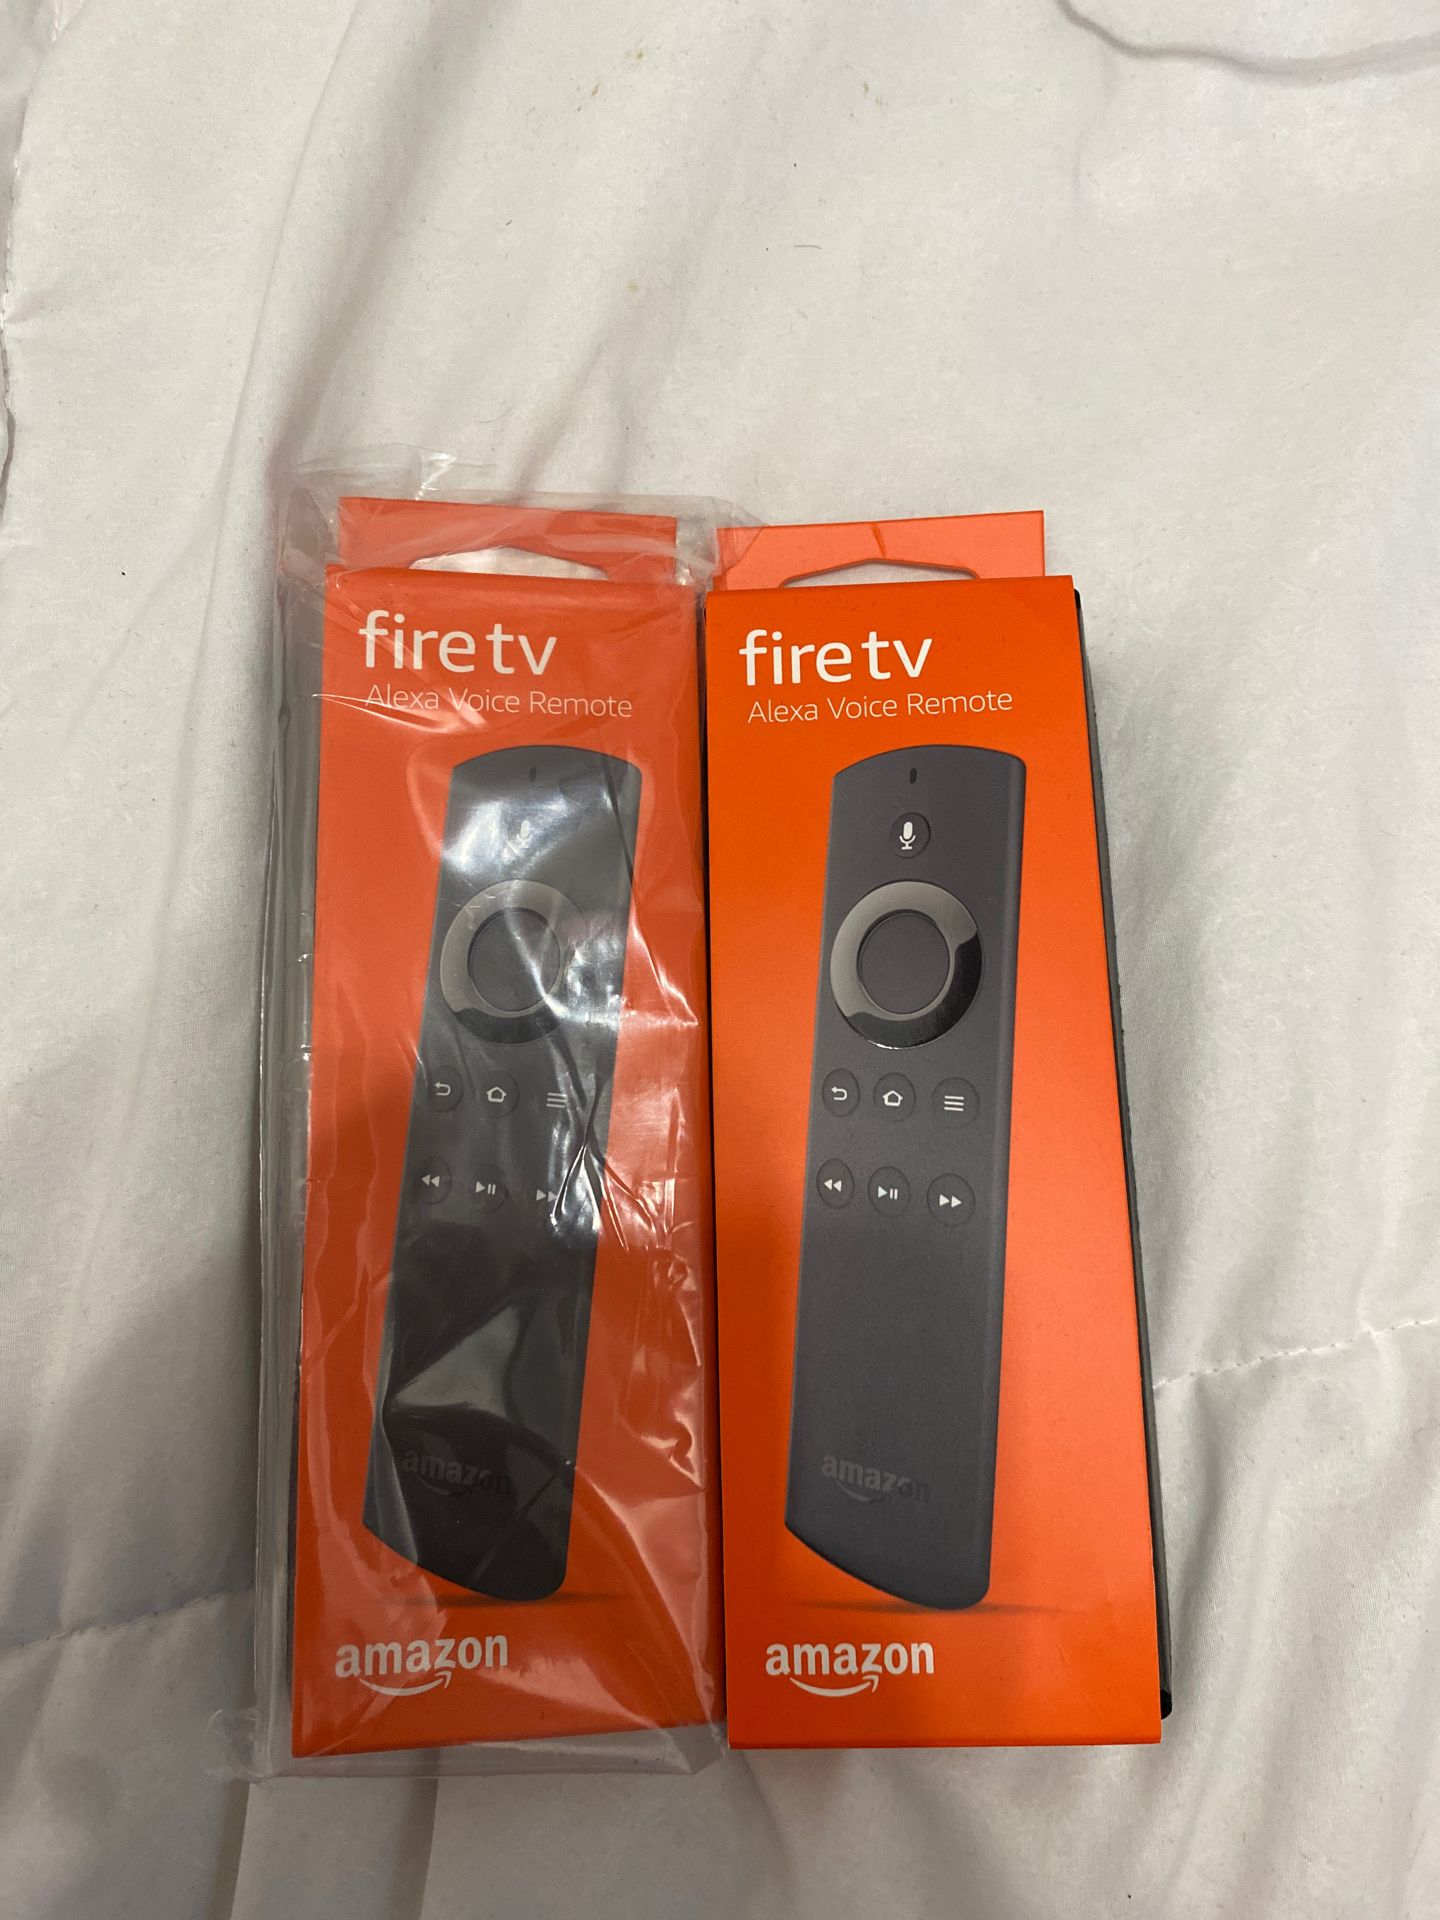 Fire TV remote with Alexa voice